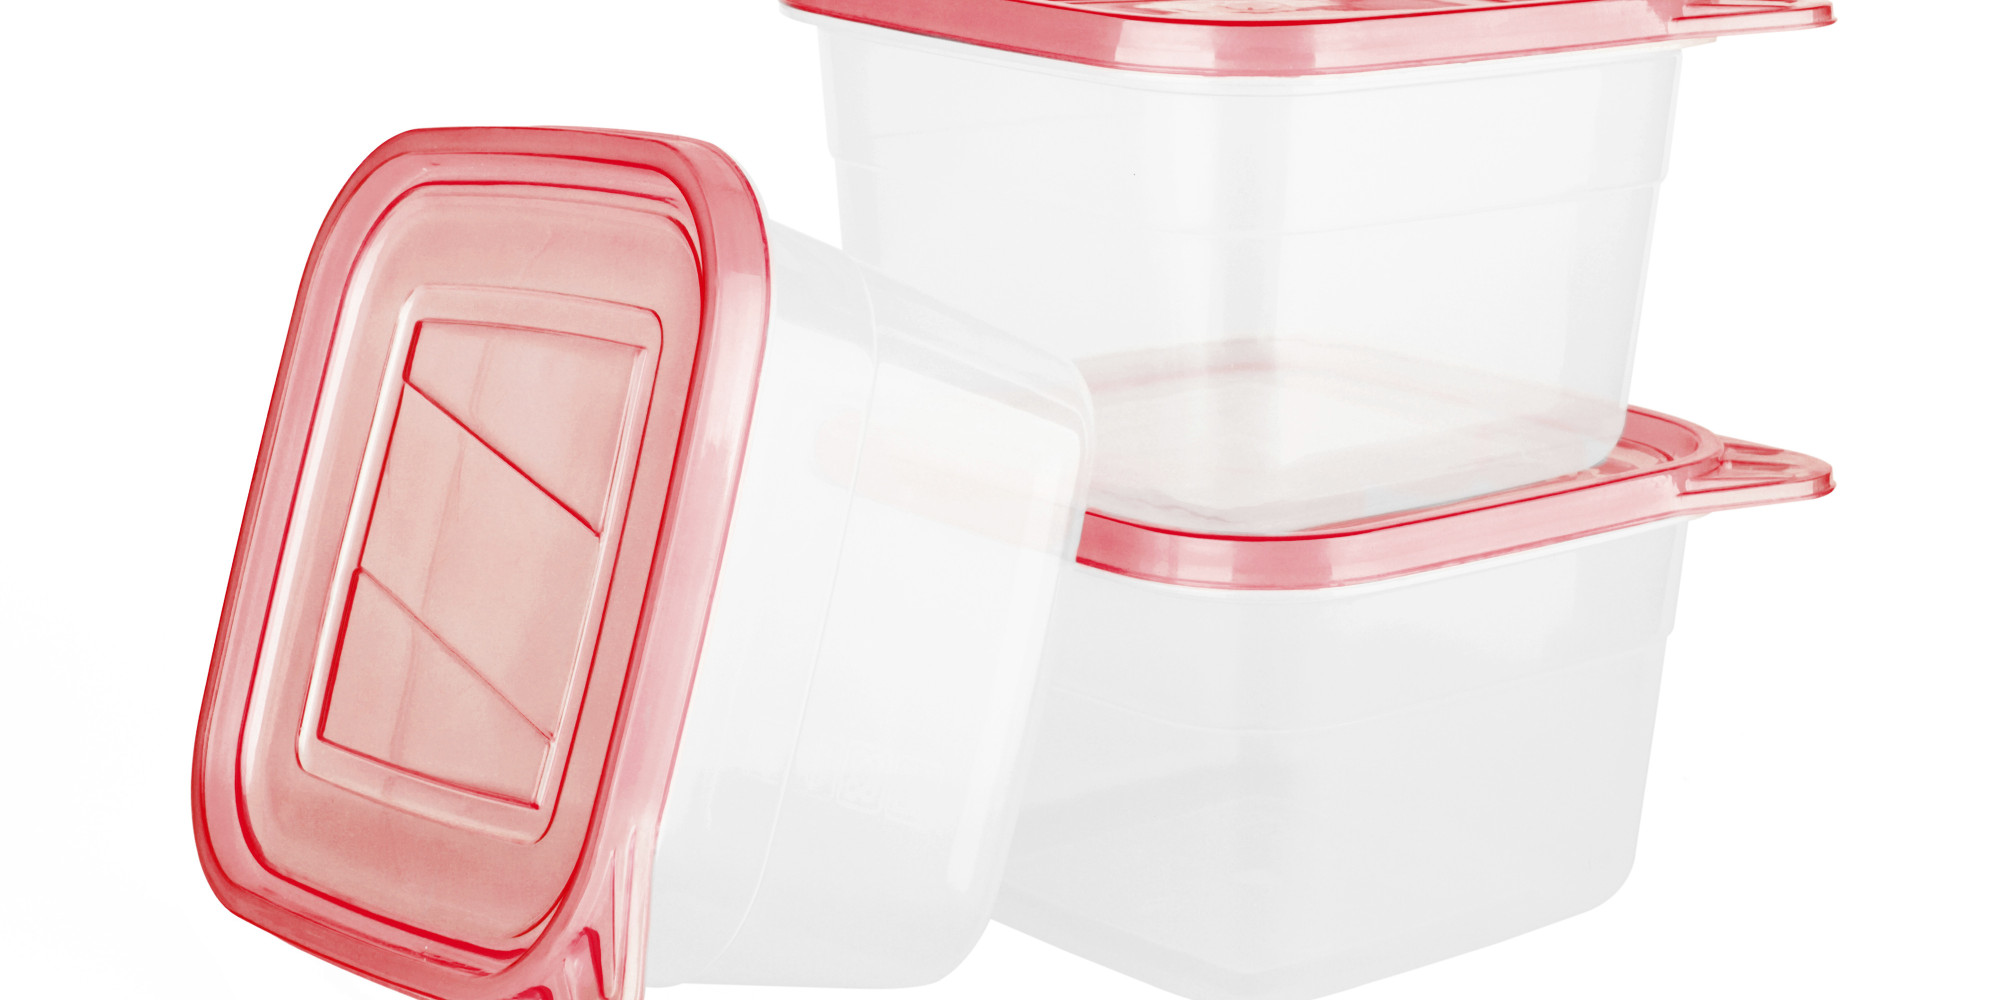 Is Putting A Plastic Container In the Microwave Really That Bad? | HuffPost